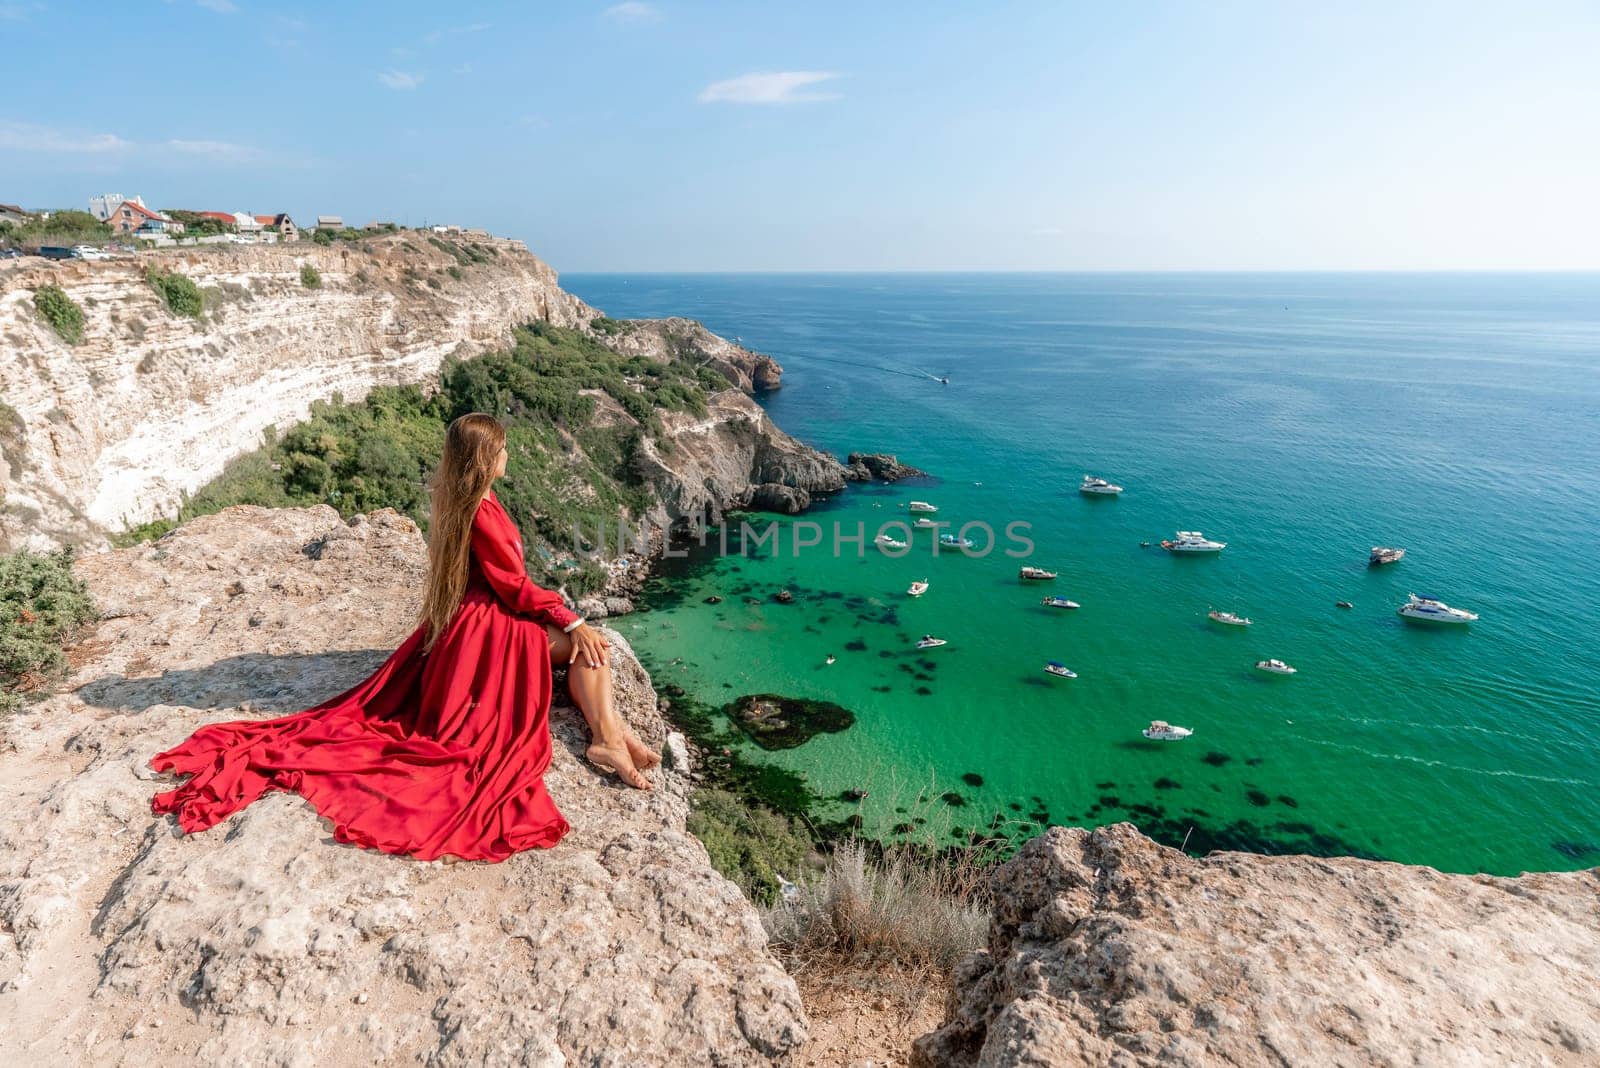 Woman red dress sea. Happy woman in a red dress and white bikini sitting on a rocky outcrop, gazing out at the sea with boats and yachts in the background